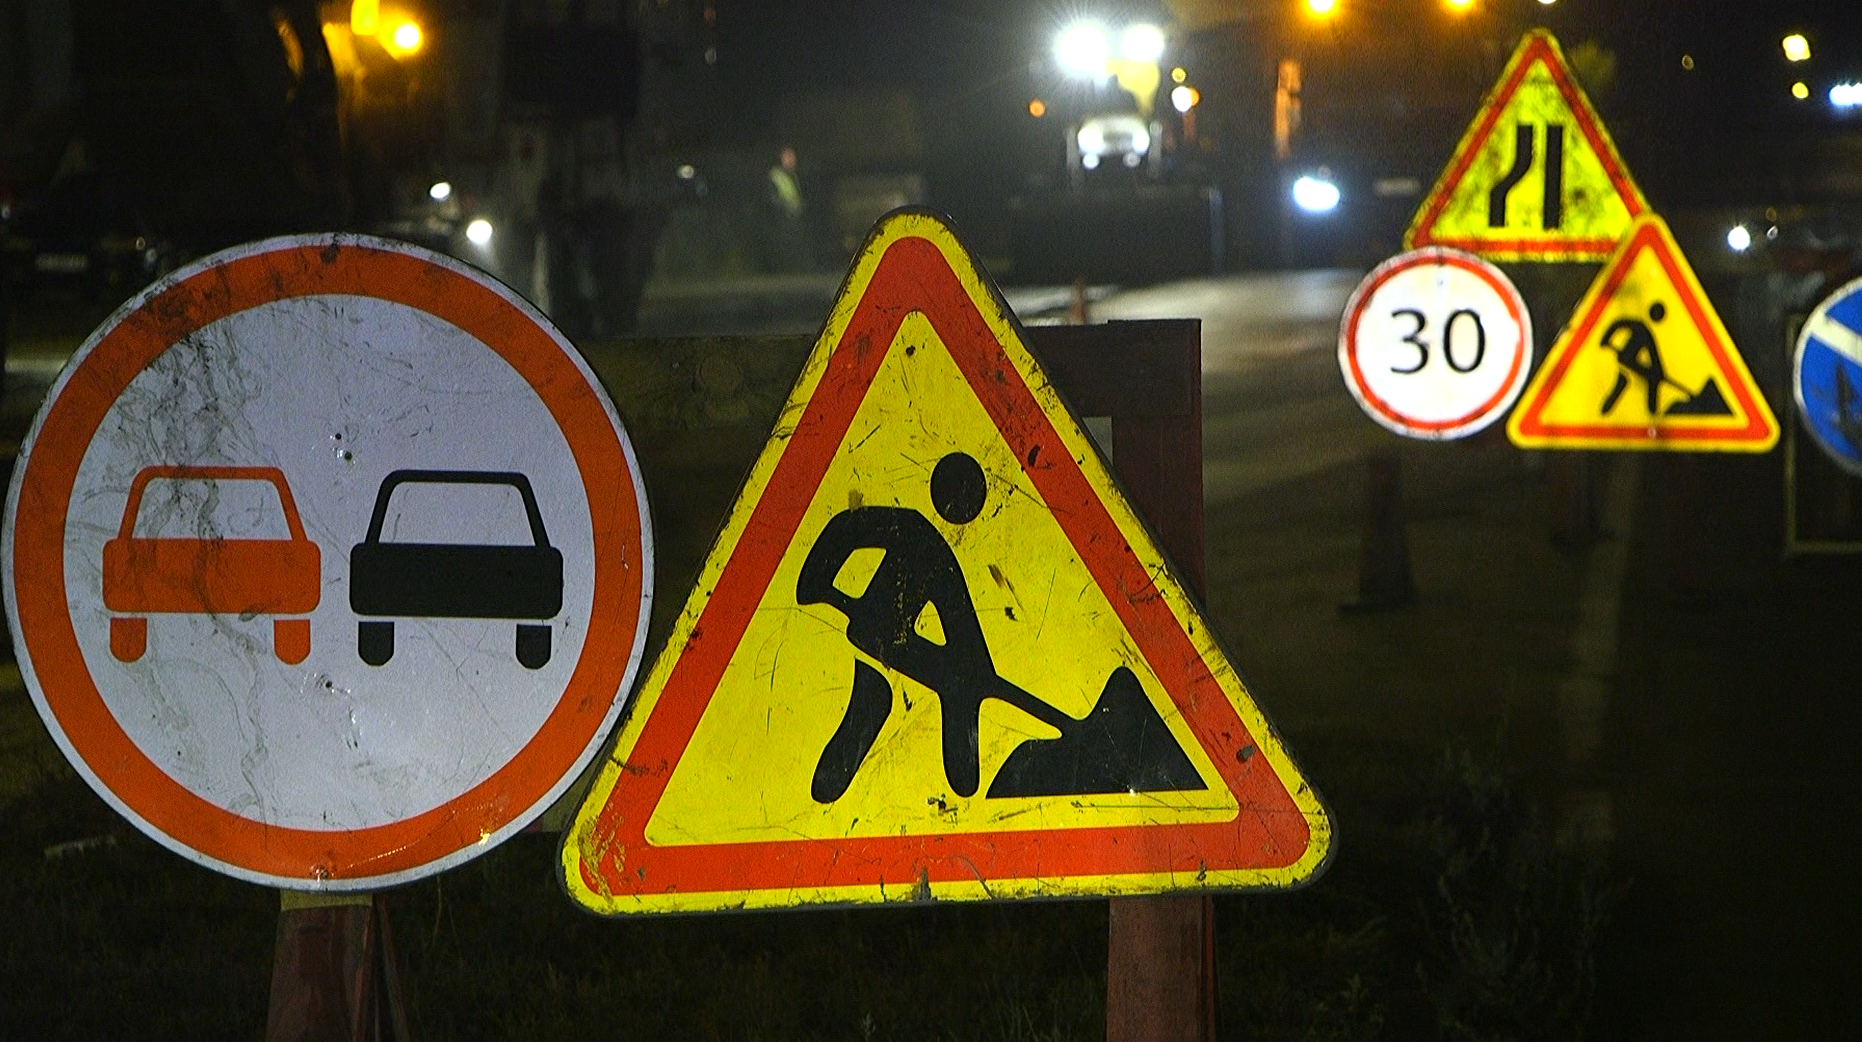 PBS is asphalting a road intersection in Lutsk